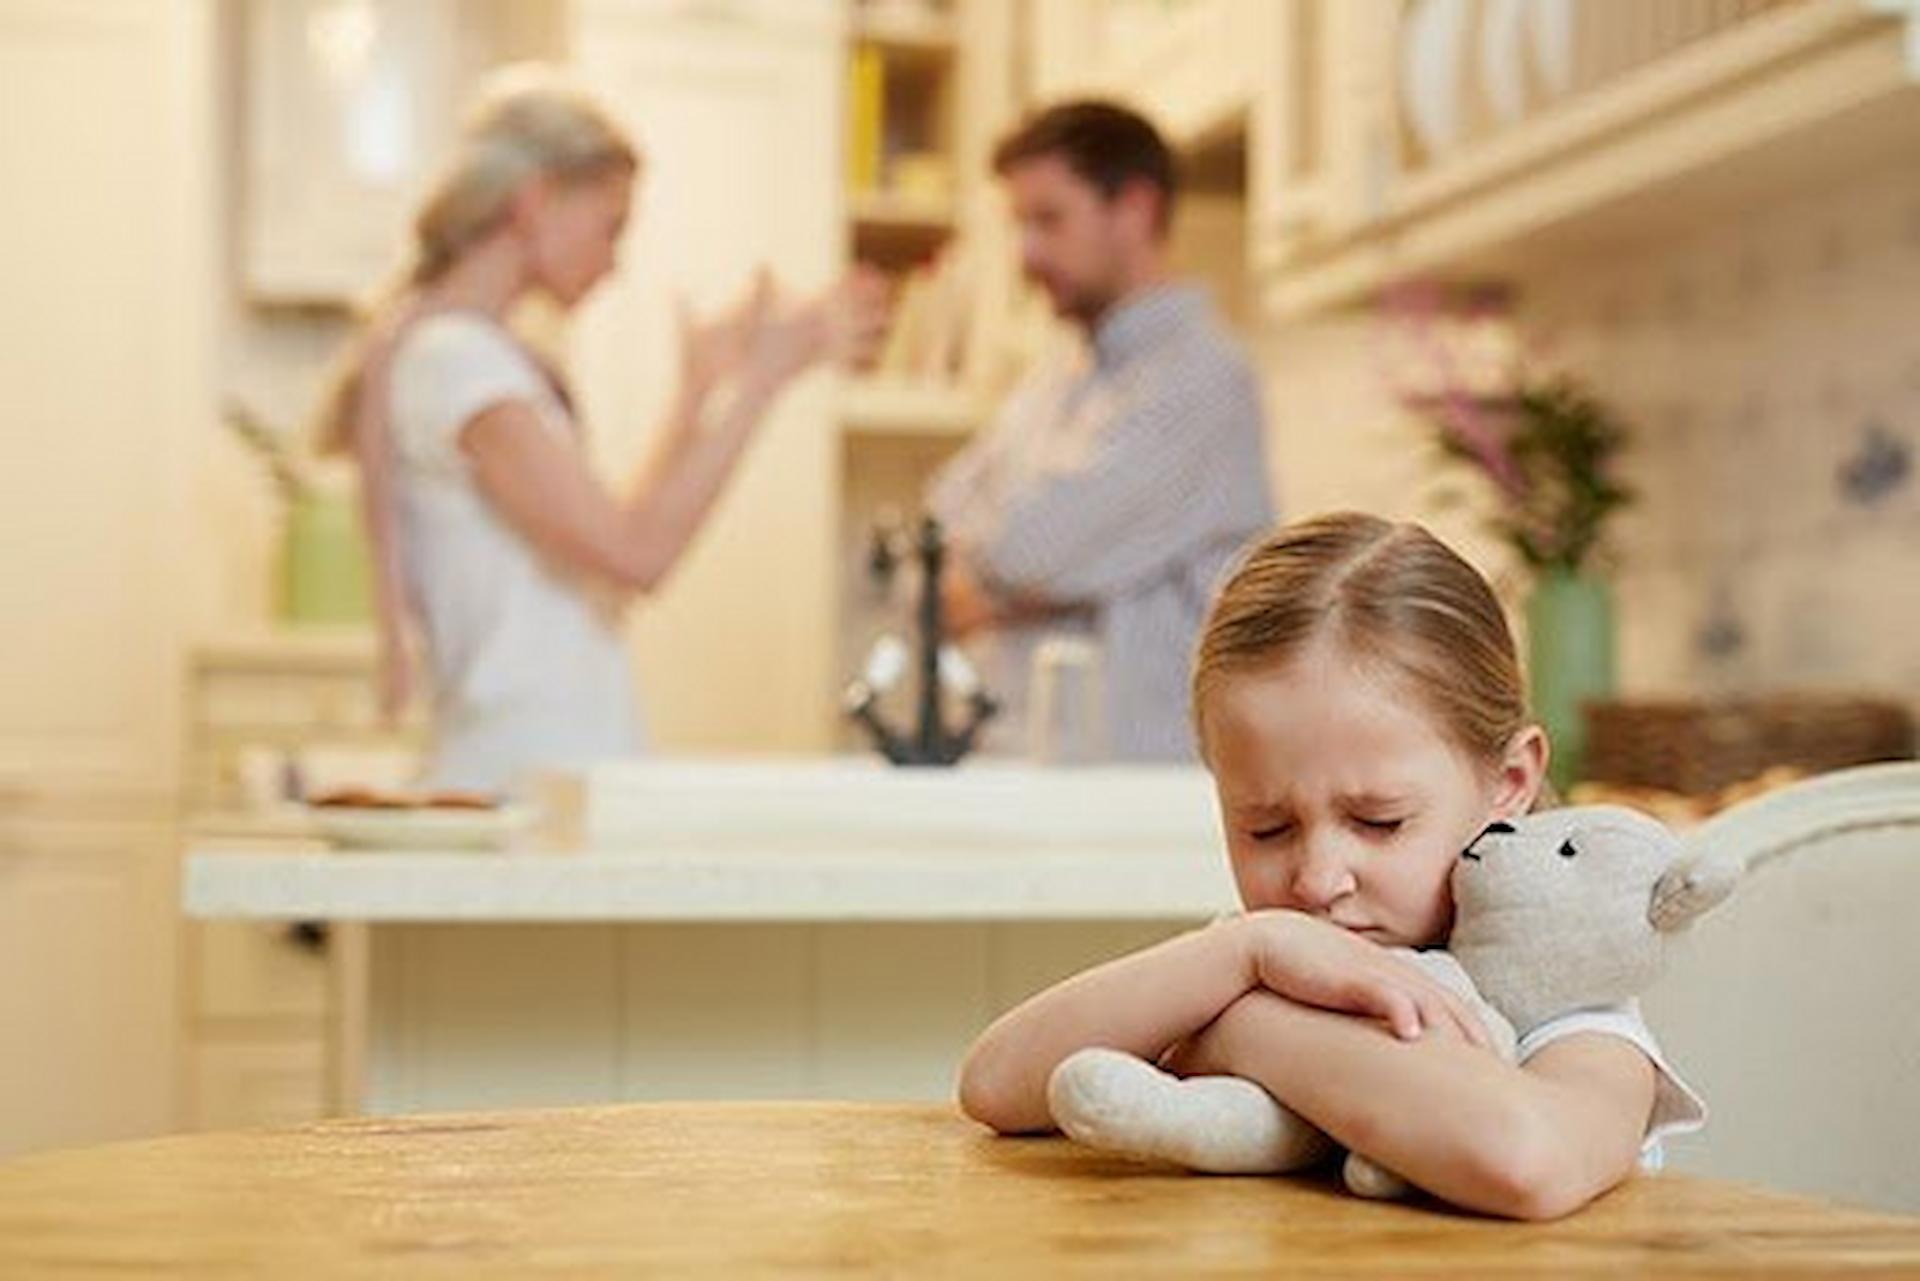 Child Custody Attorney in Houston who fights for you